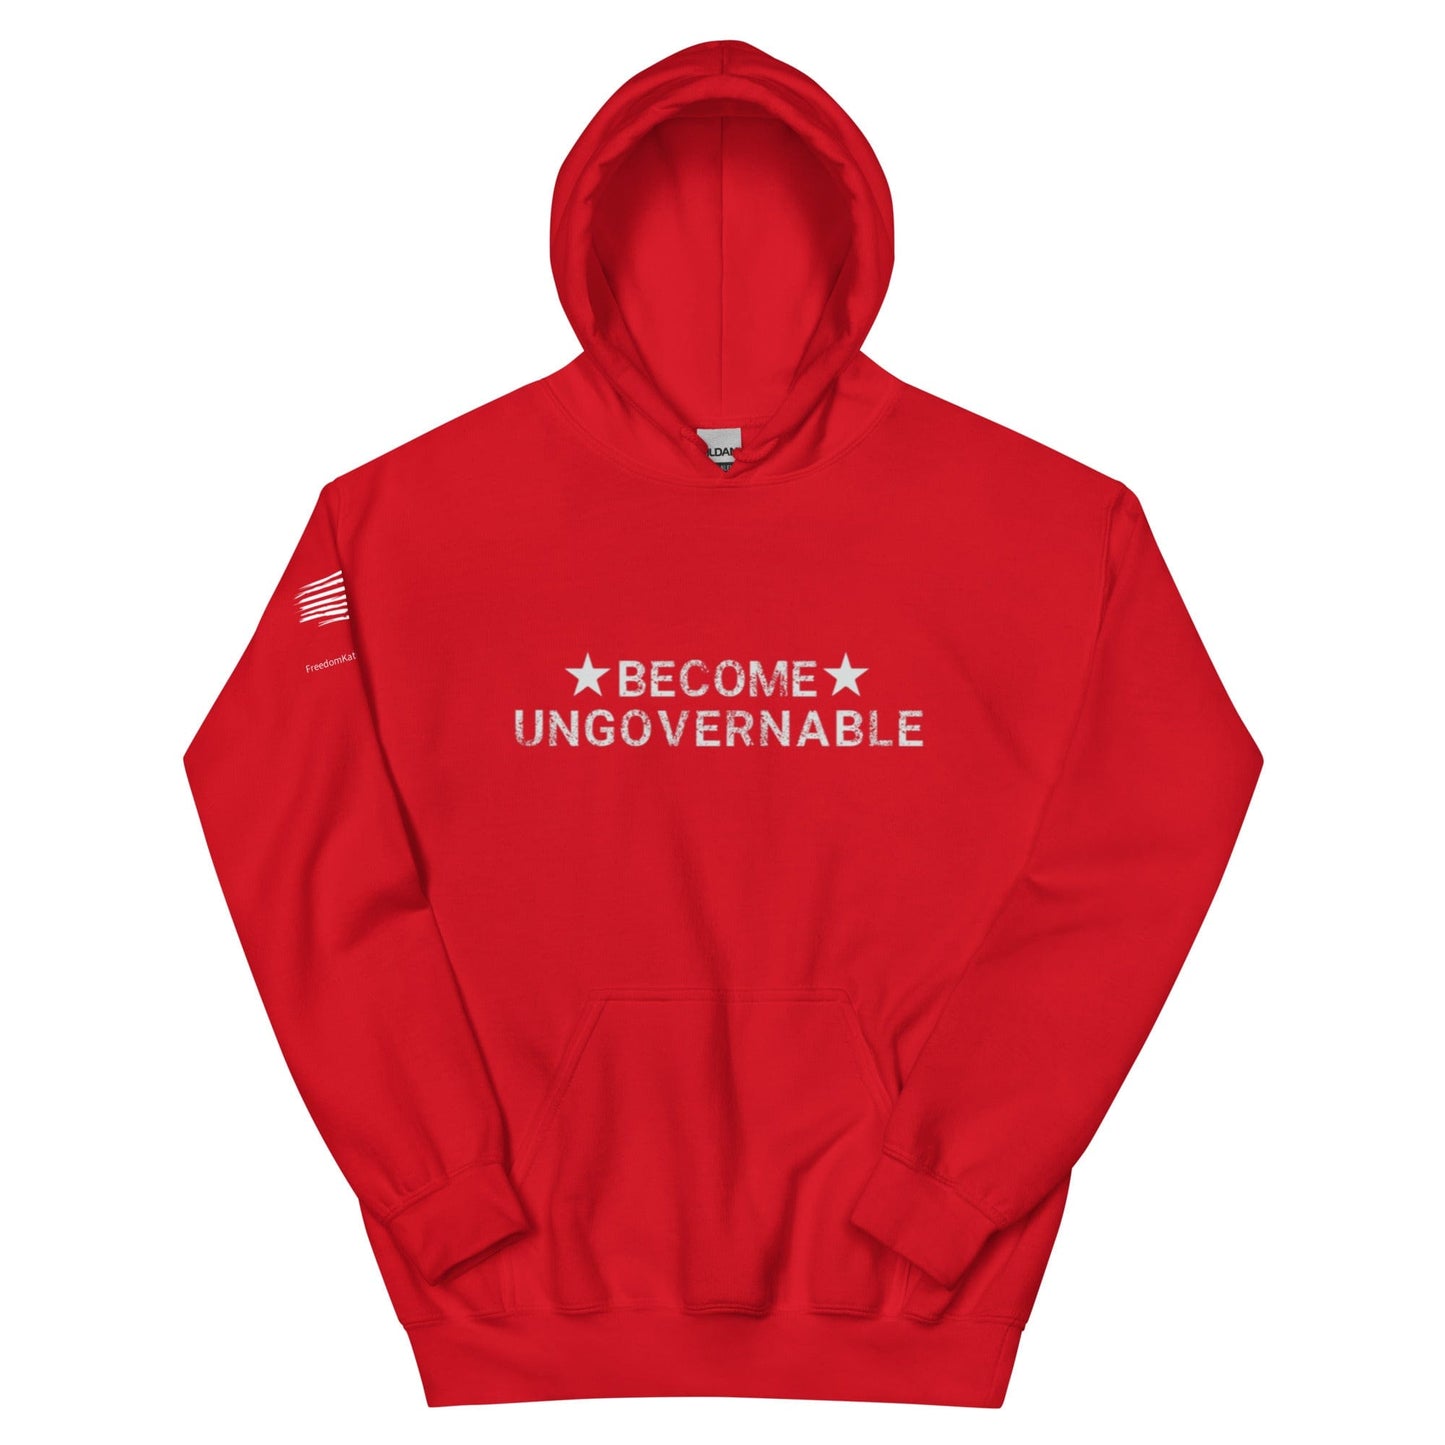 FreedomKat Designs Hoodie Red / S Become Ungovernable Hoodie